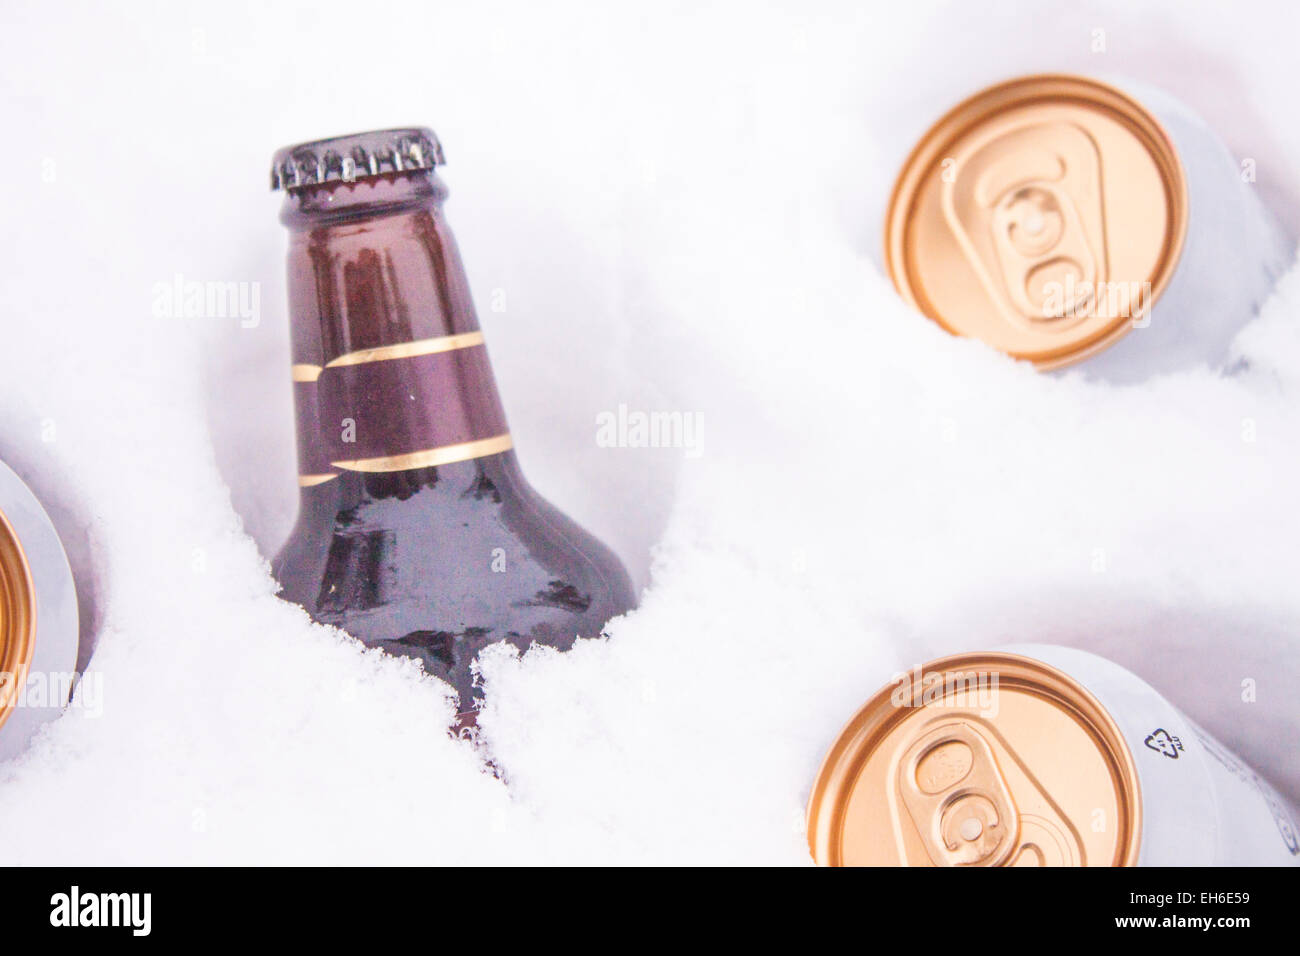 Bottles of cold beer in white snow Stock Photo